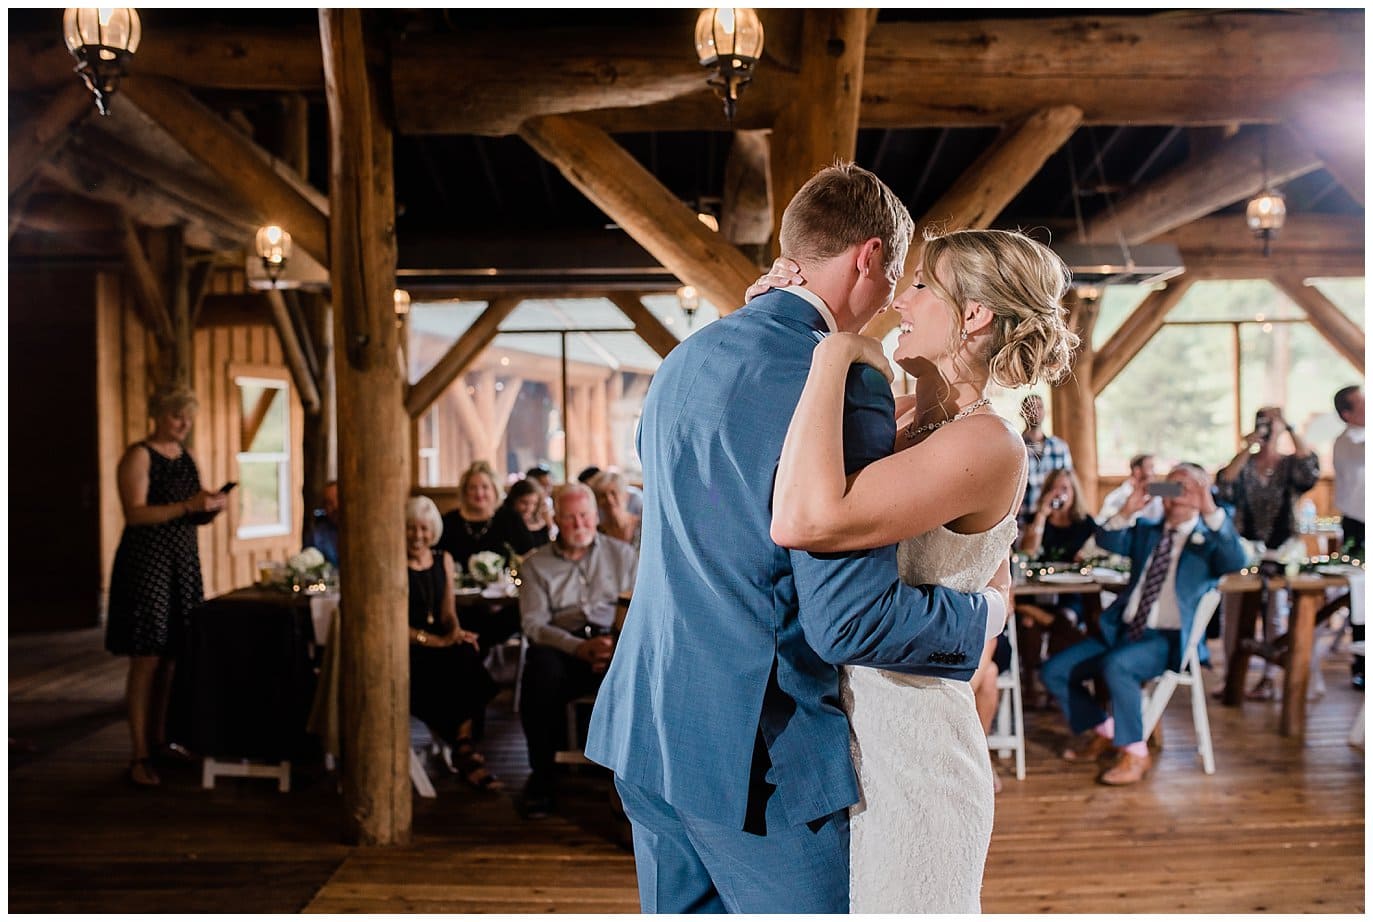 first dance in pavilion at Piney River Ranch Summer Wedding by Beaver Creek wedding photographer Jennie Crate photographer